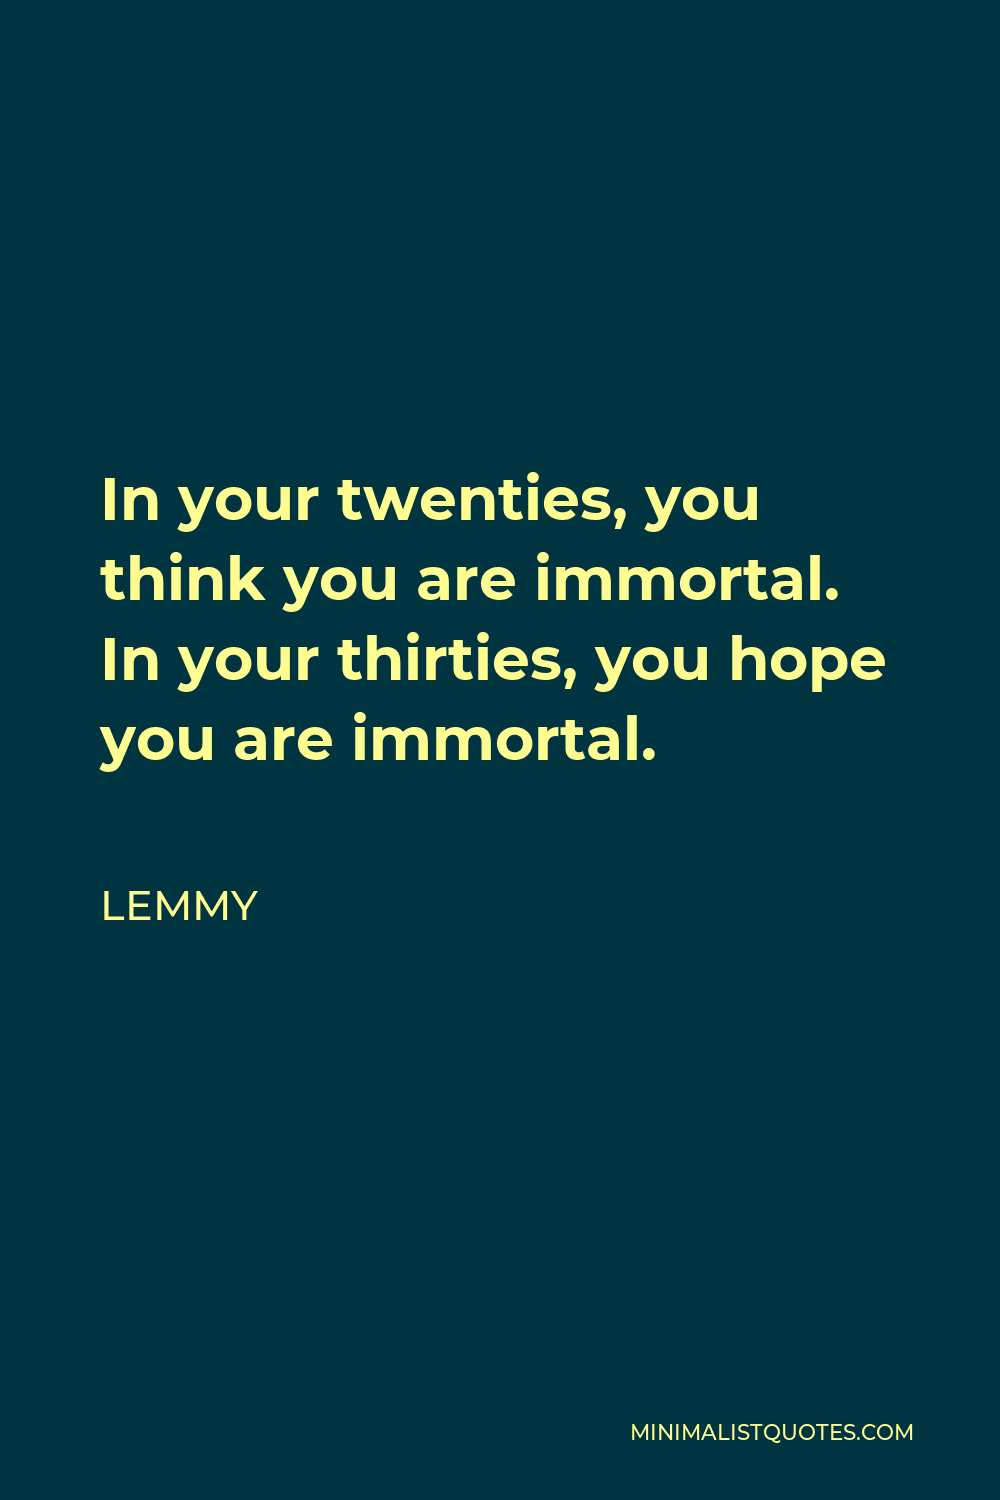 Lemmy Quote In Your Twenties You Think You Are Immortal In Your Thirties You Hope You Are 0994